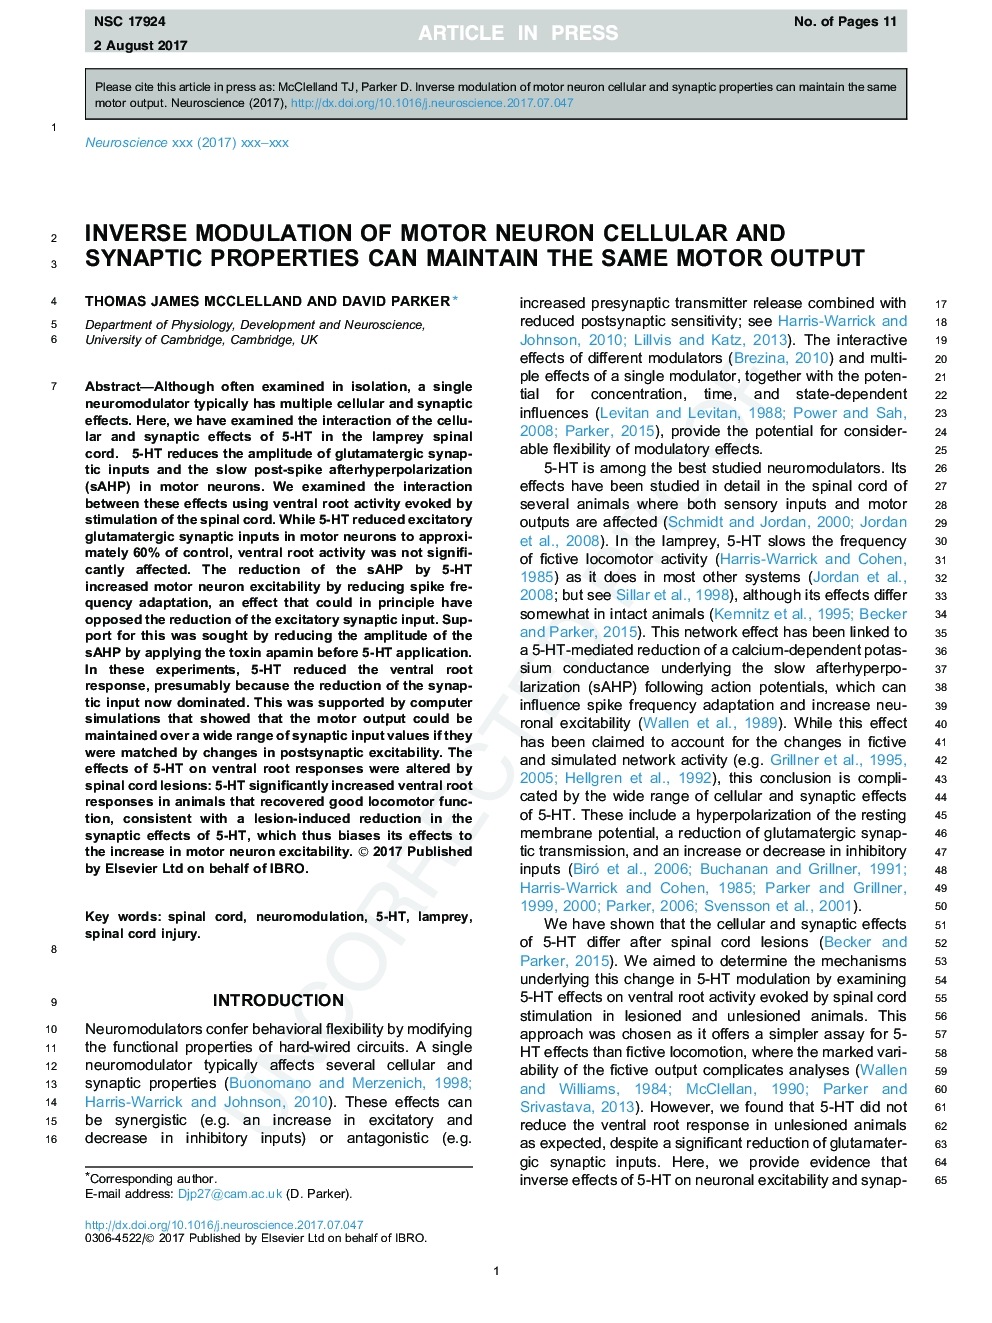 Inverse modulation of motor neuron cellular and synaptic properties can maintain the same motor output